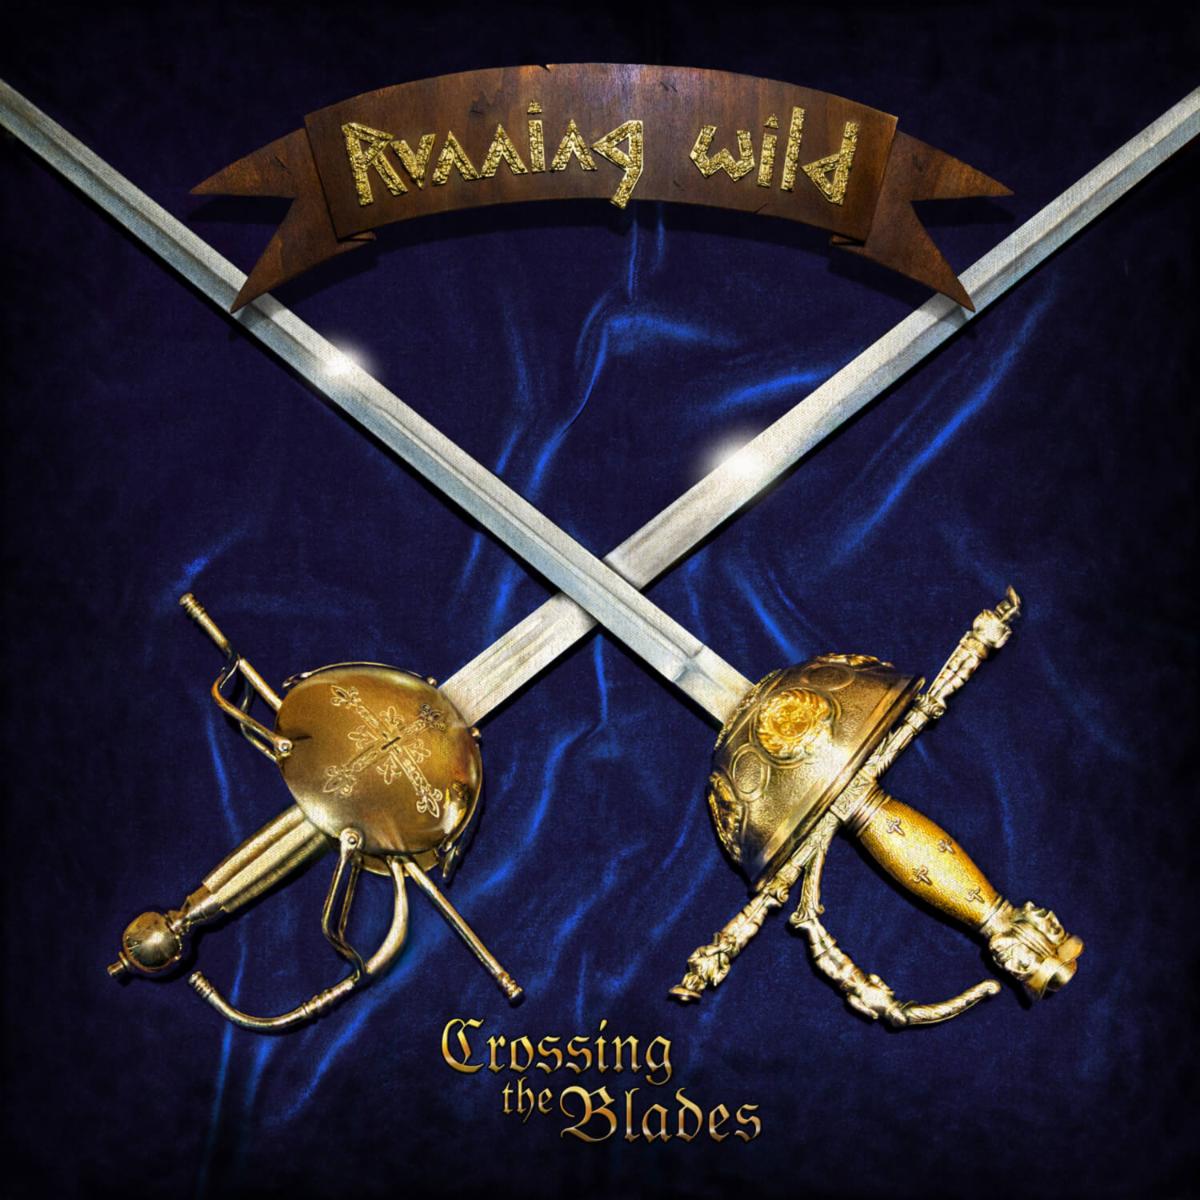 RUNNING WILD to Release Crossing The Blades EP December 6 via SPV